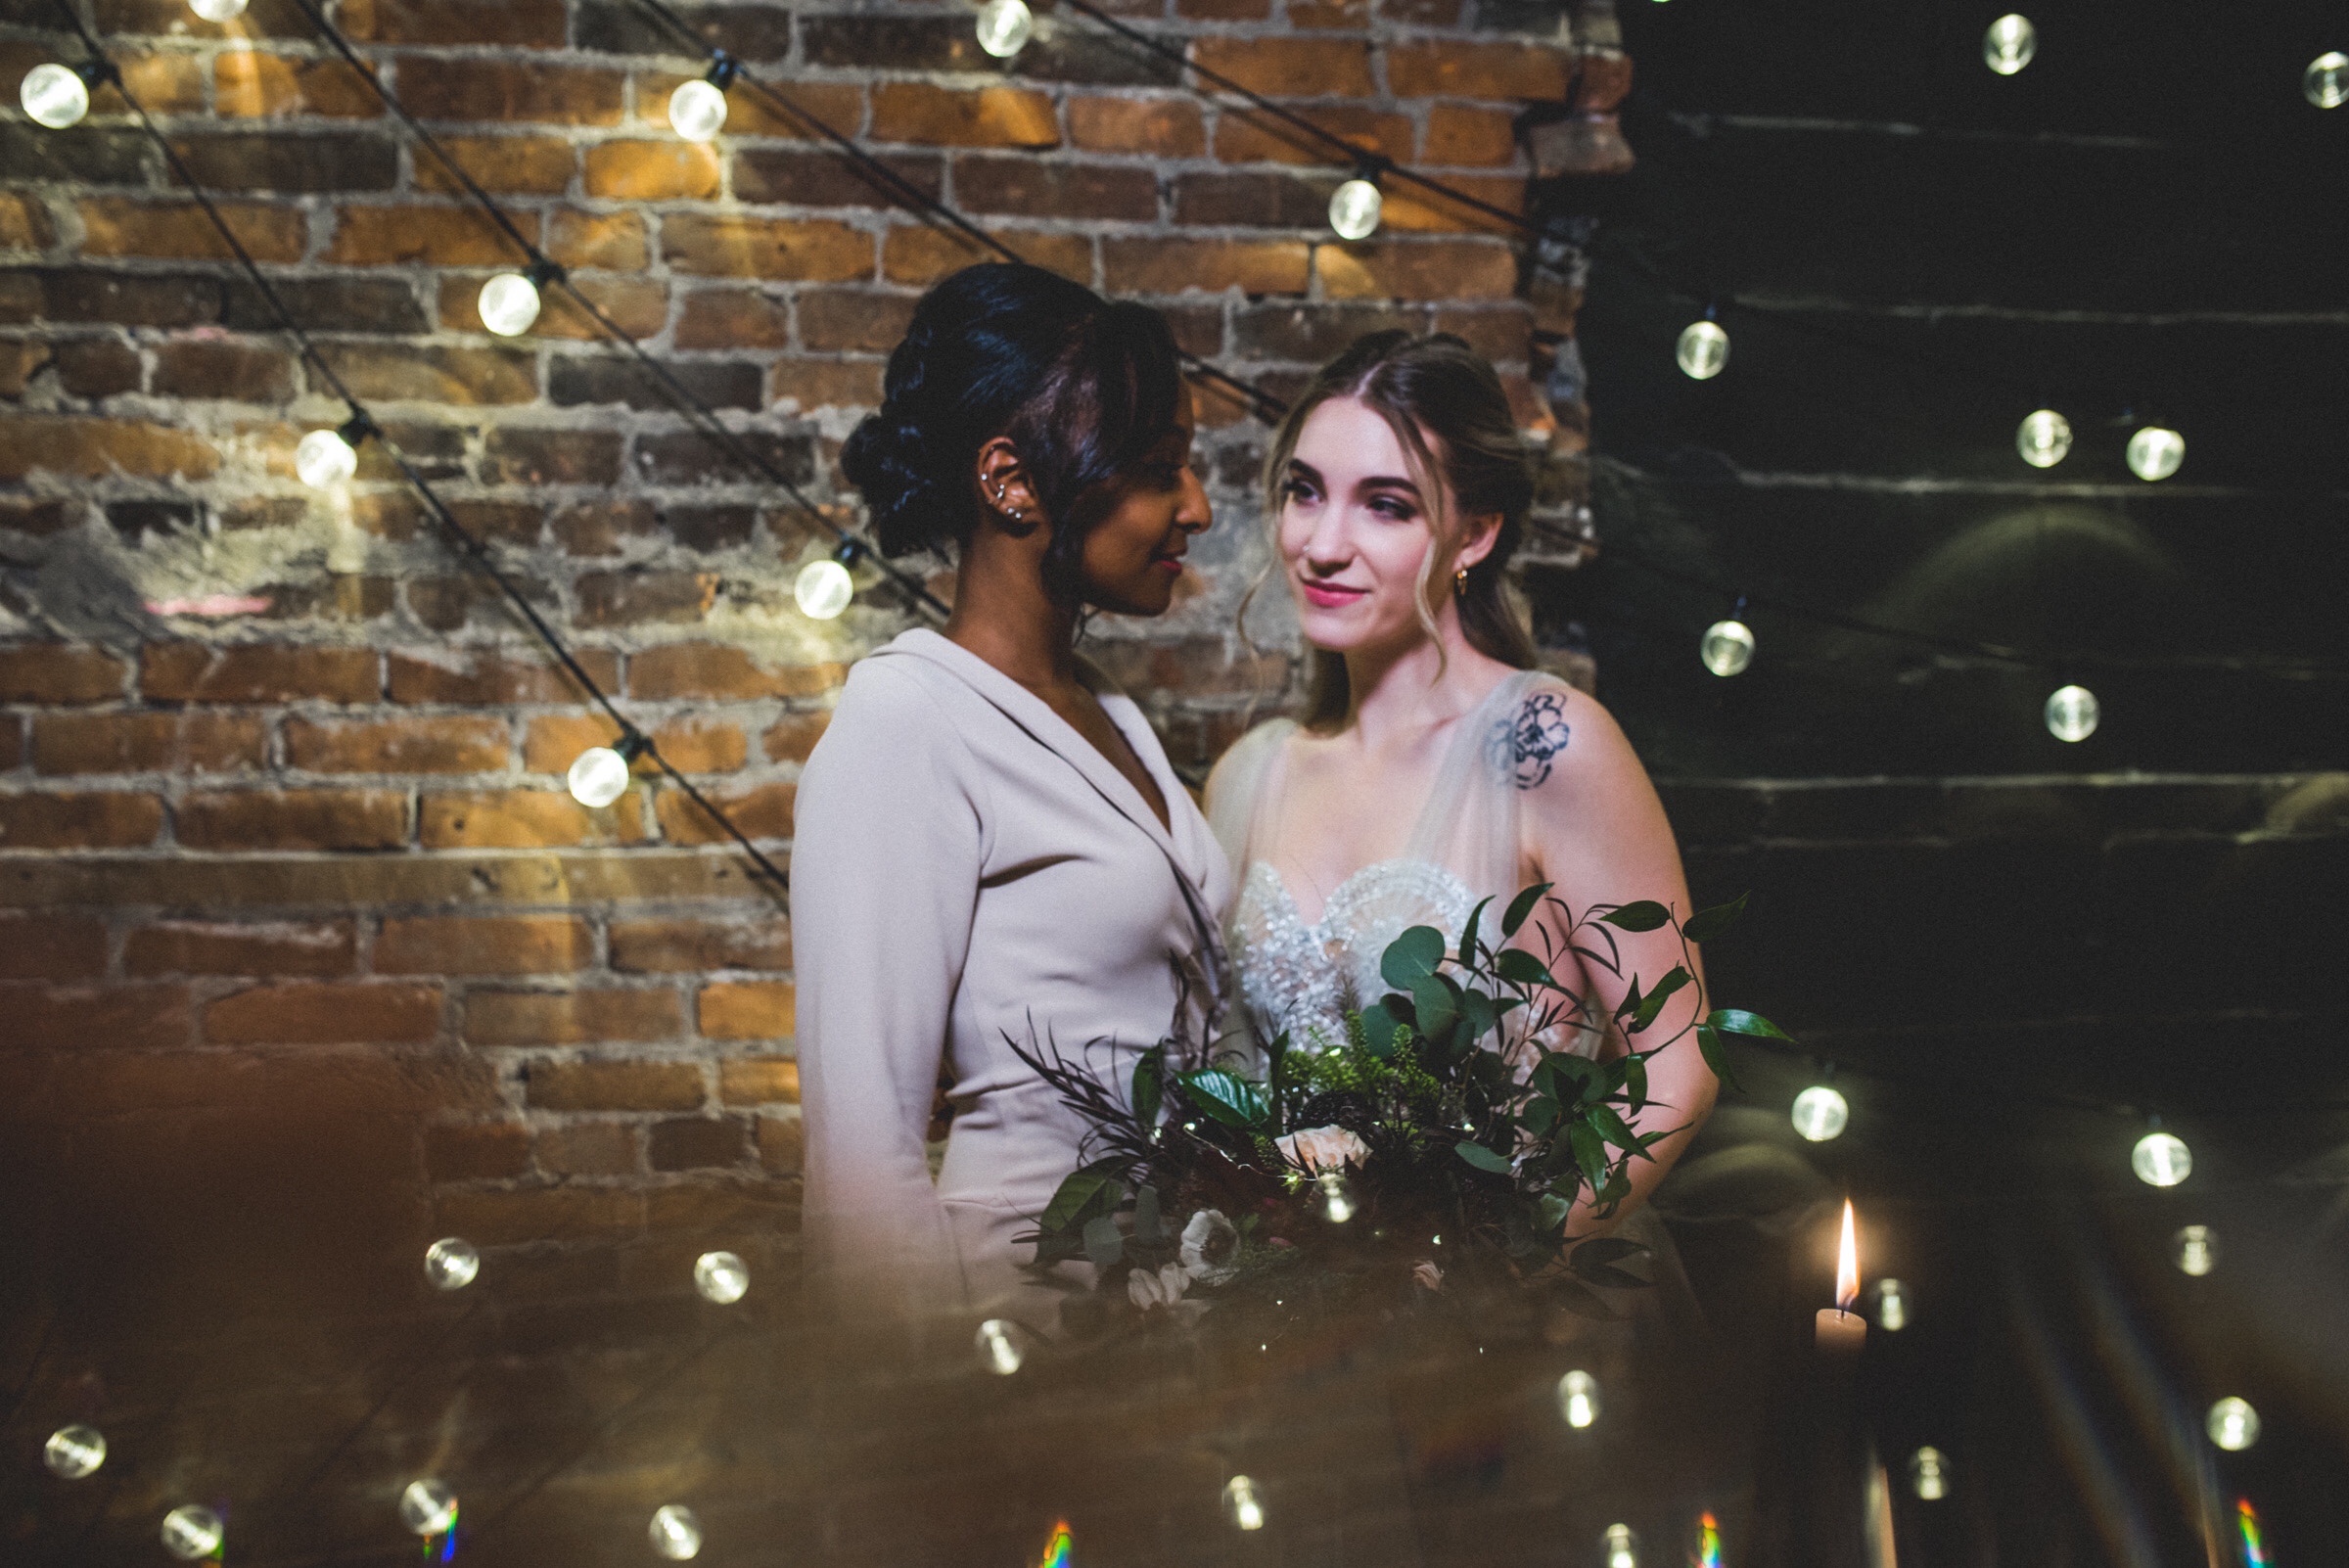 Same sex bridal couple surrounded by lights at minnesota wedding venue The loft at studio J. Portrait captured by minnesota wedding photographer Madelin Zaycheck of the Hawk and Sparrow using a prism for reflection of the lights